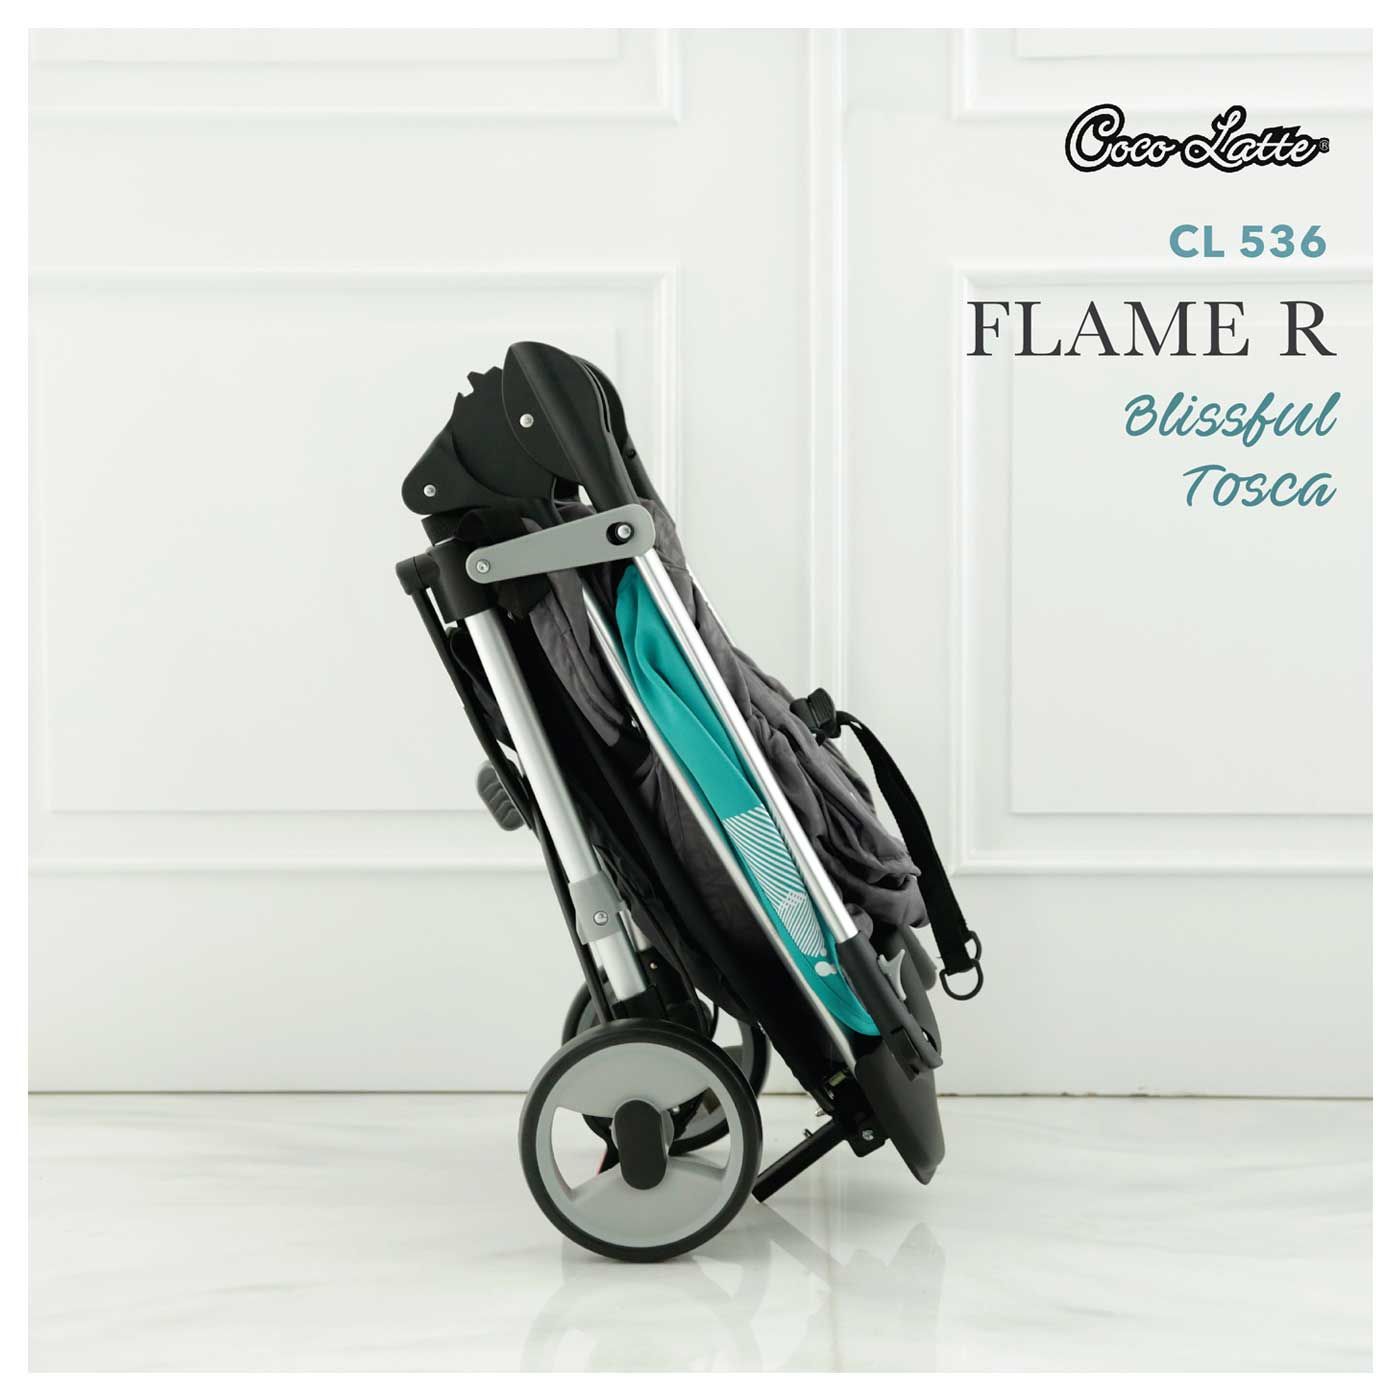 Cocolatte Stroller CL 536 Flame R- Blissful Tosca - 3